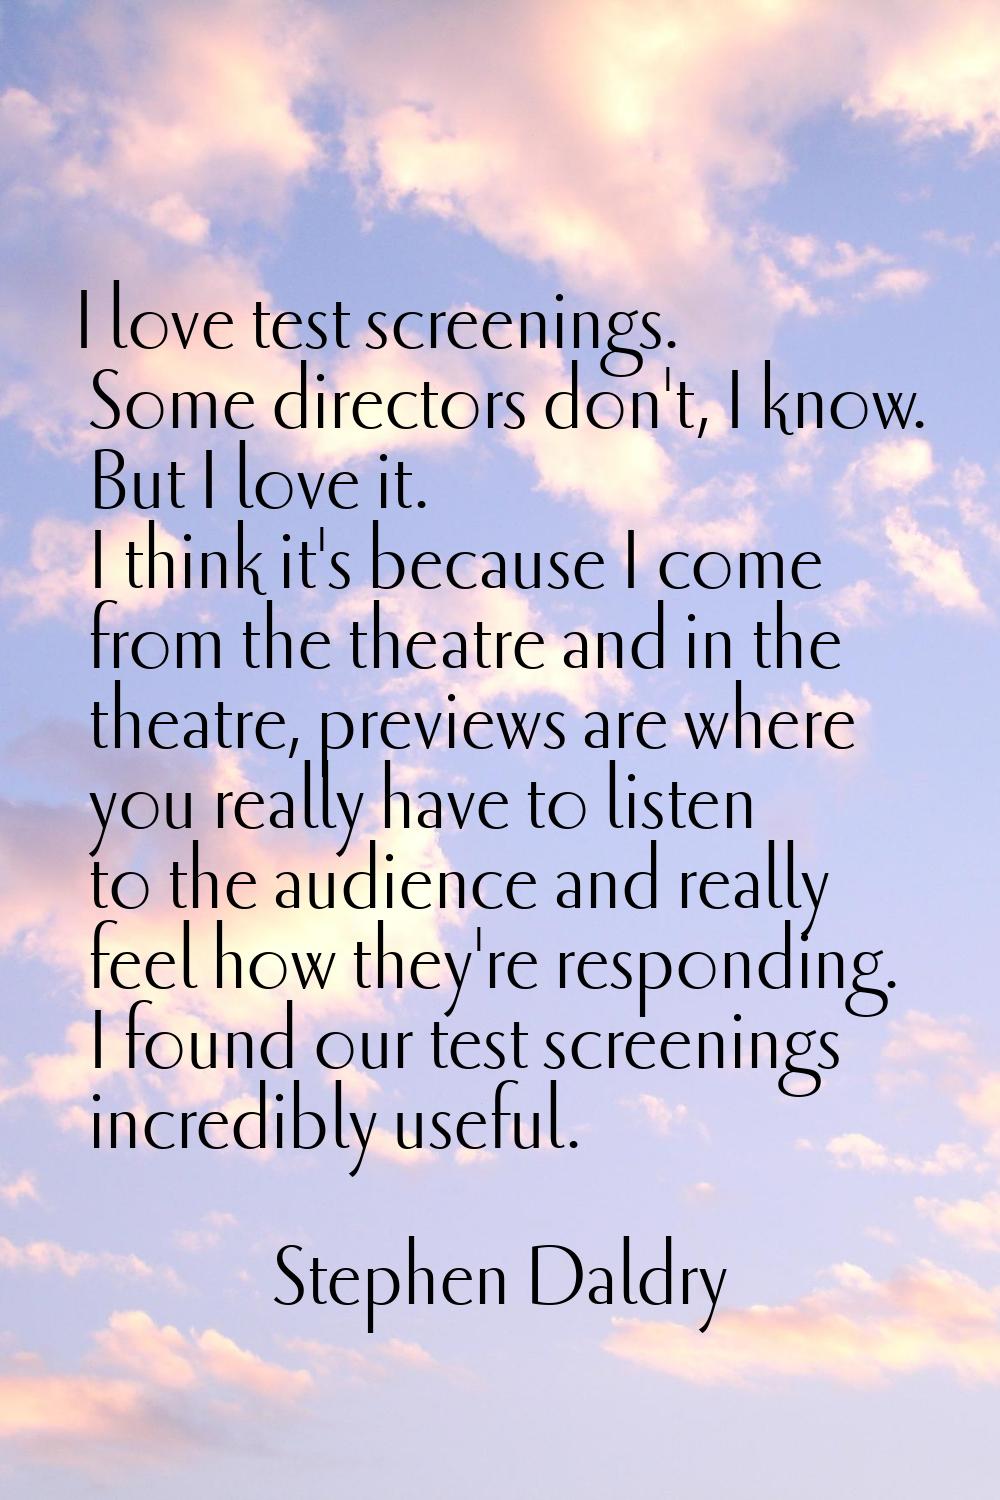 I love test screenings. Some directors don't, I know. But I love it. I think it's because I come fr